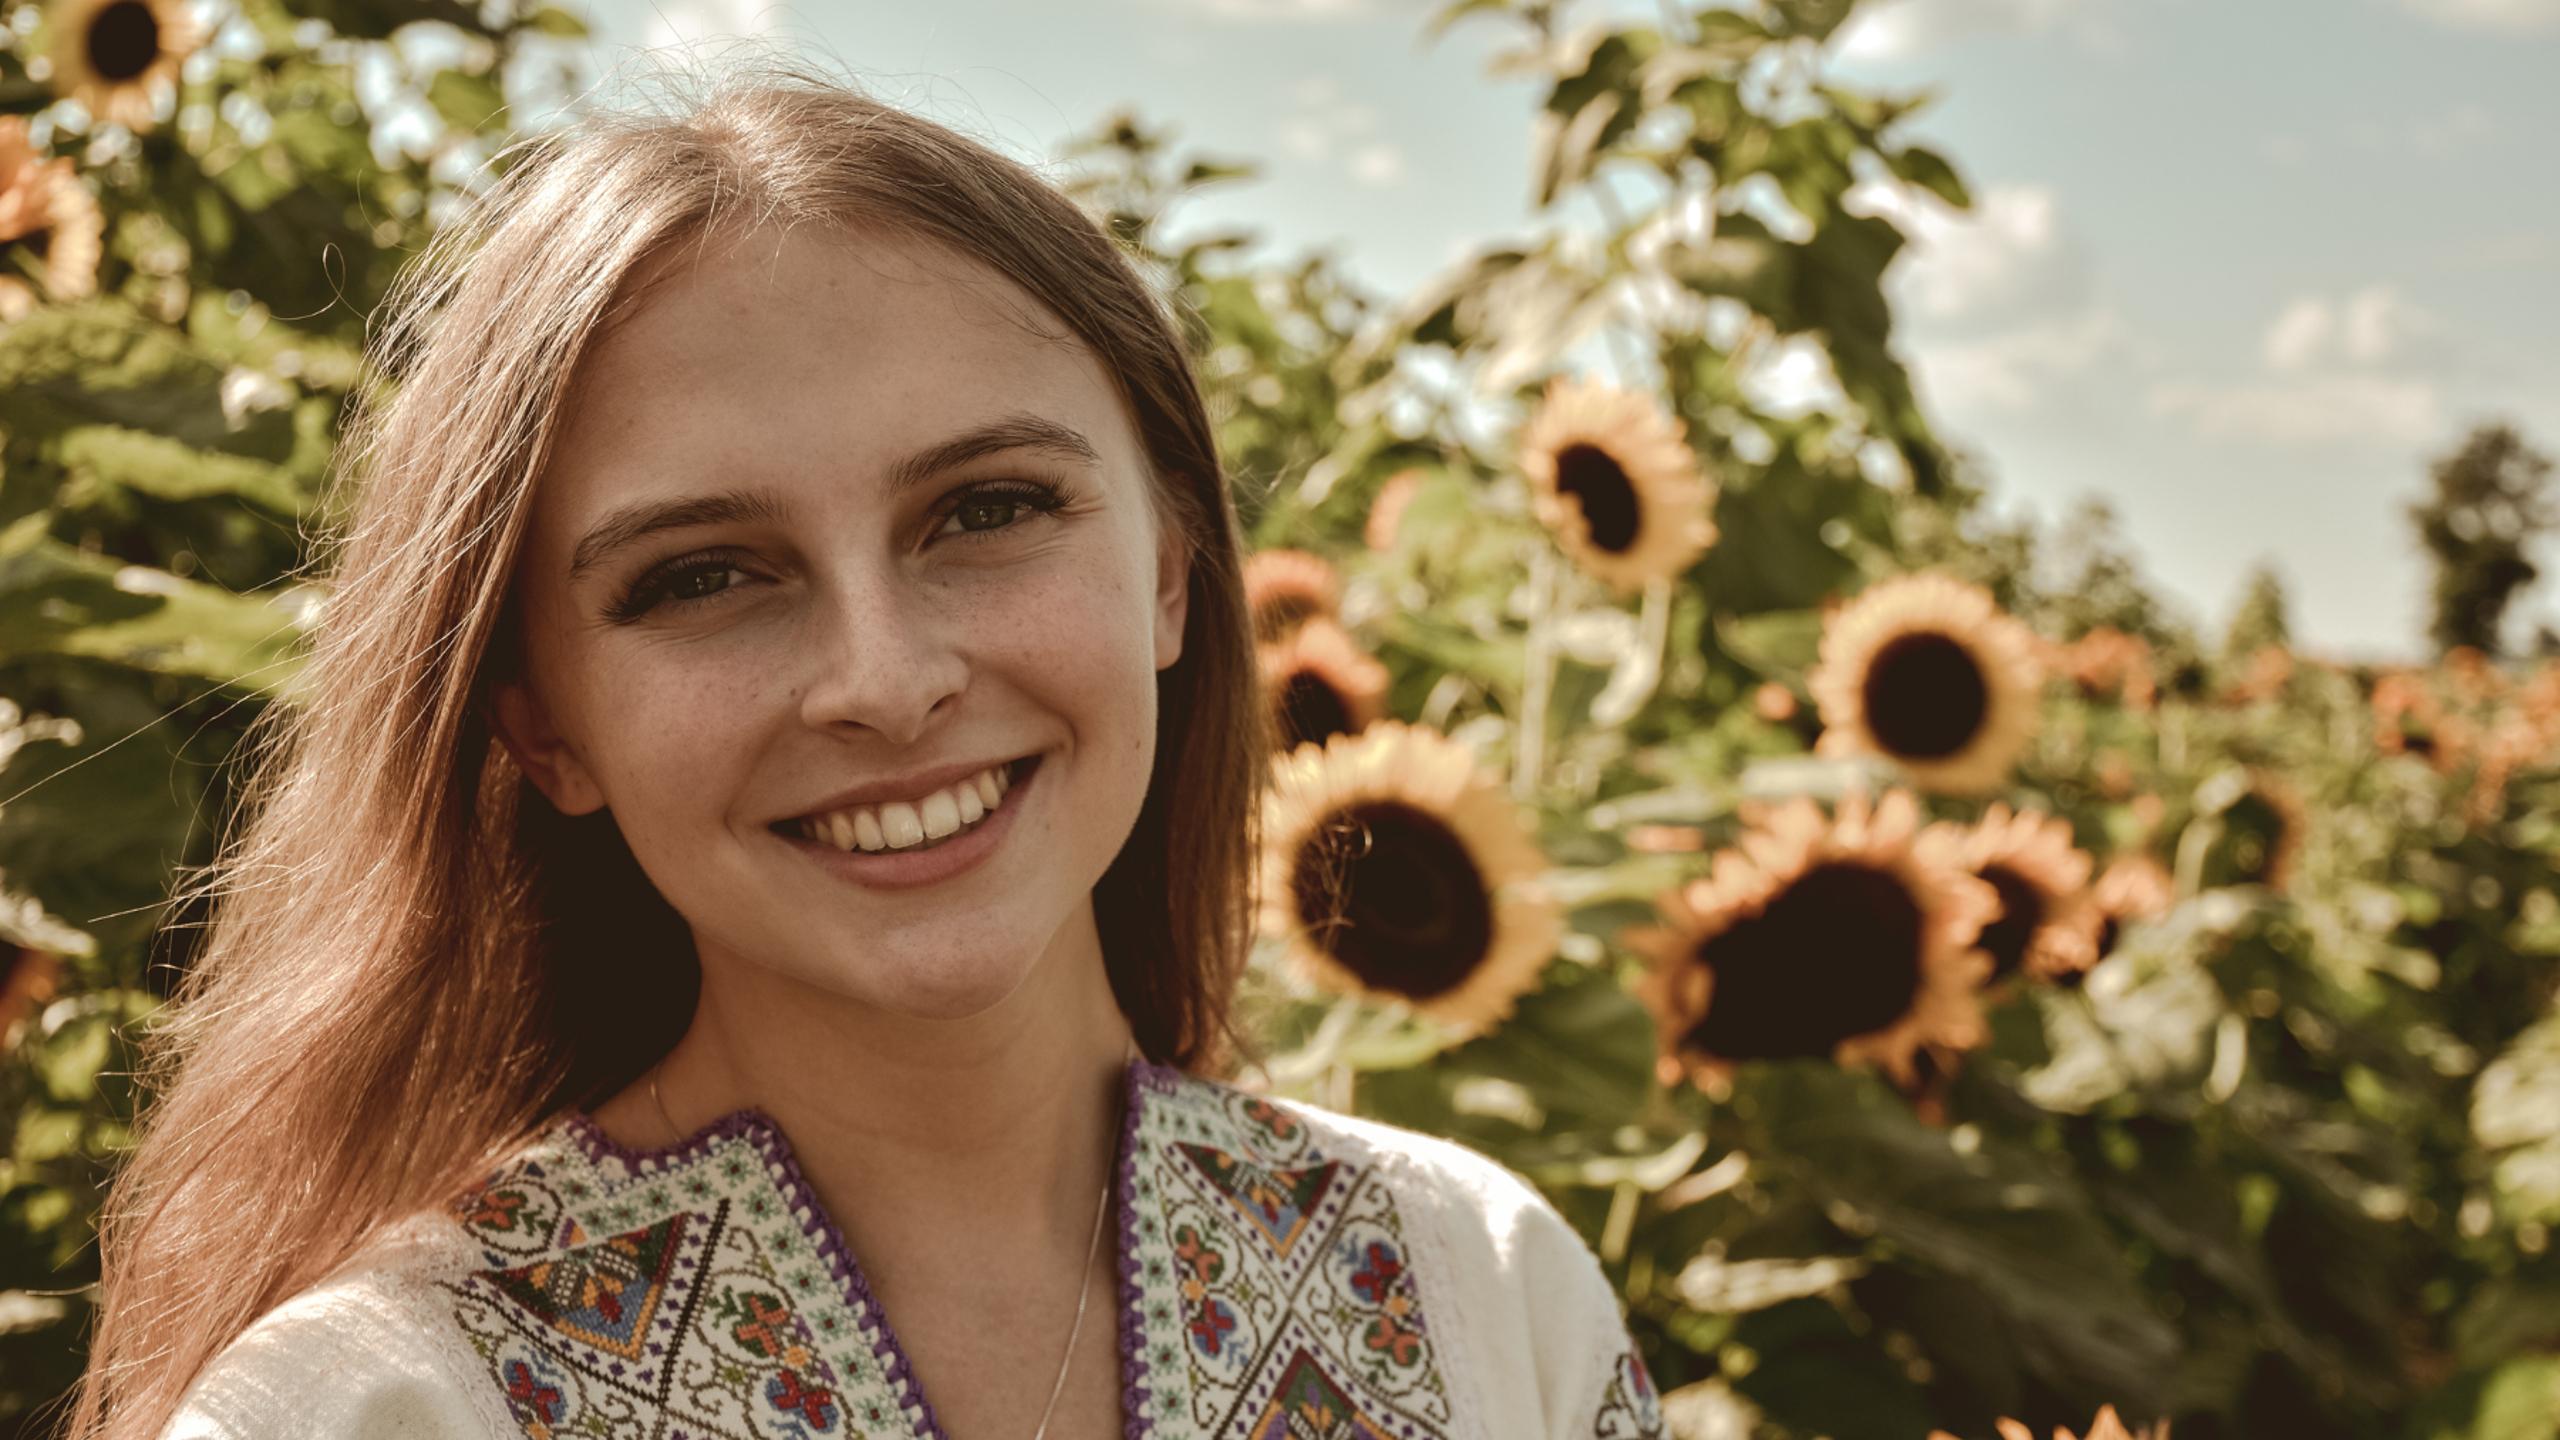 Alexandra Holyk in front of a sunflower field.